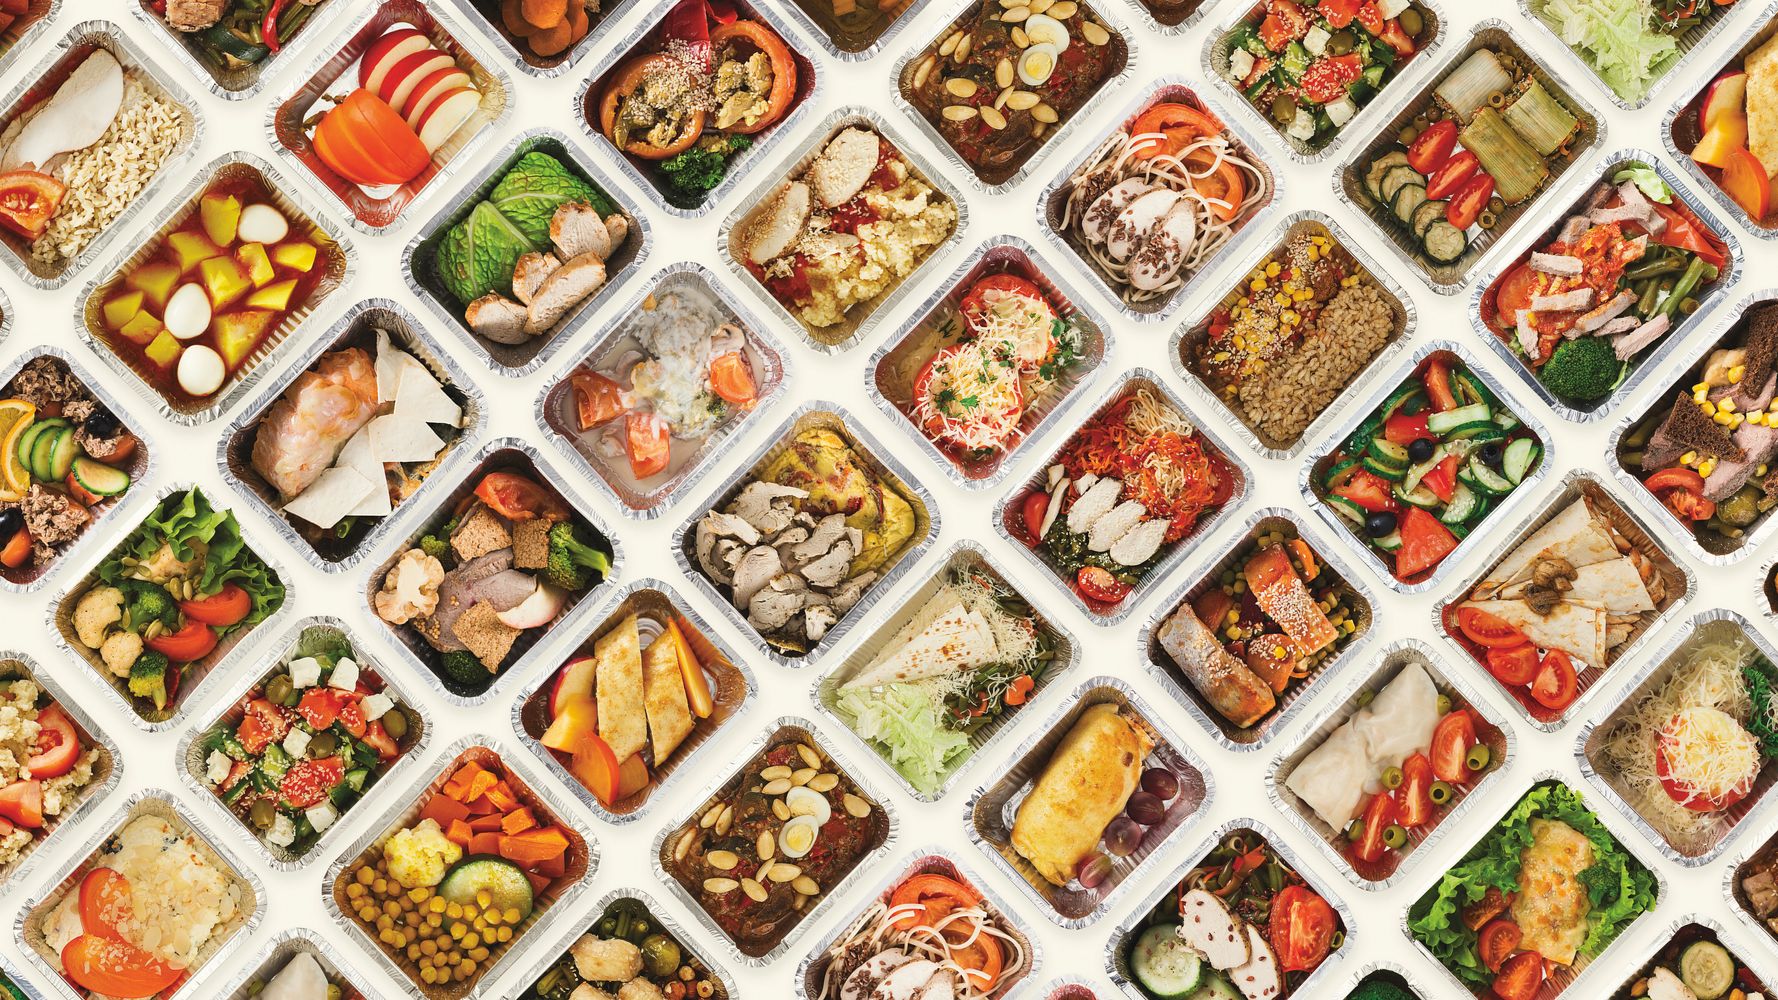 6 Of The Best Services For Healthy Prepared Meals Delivered To ...